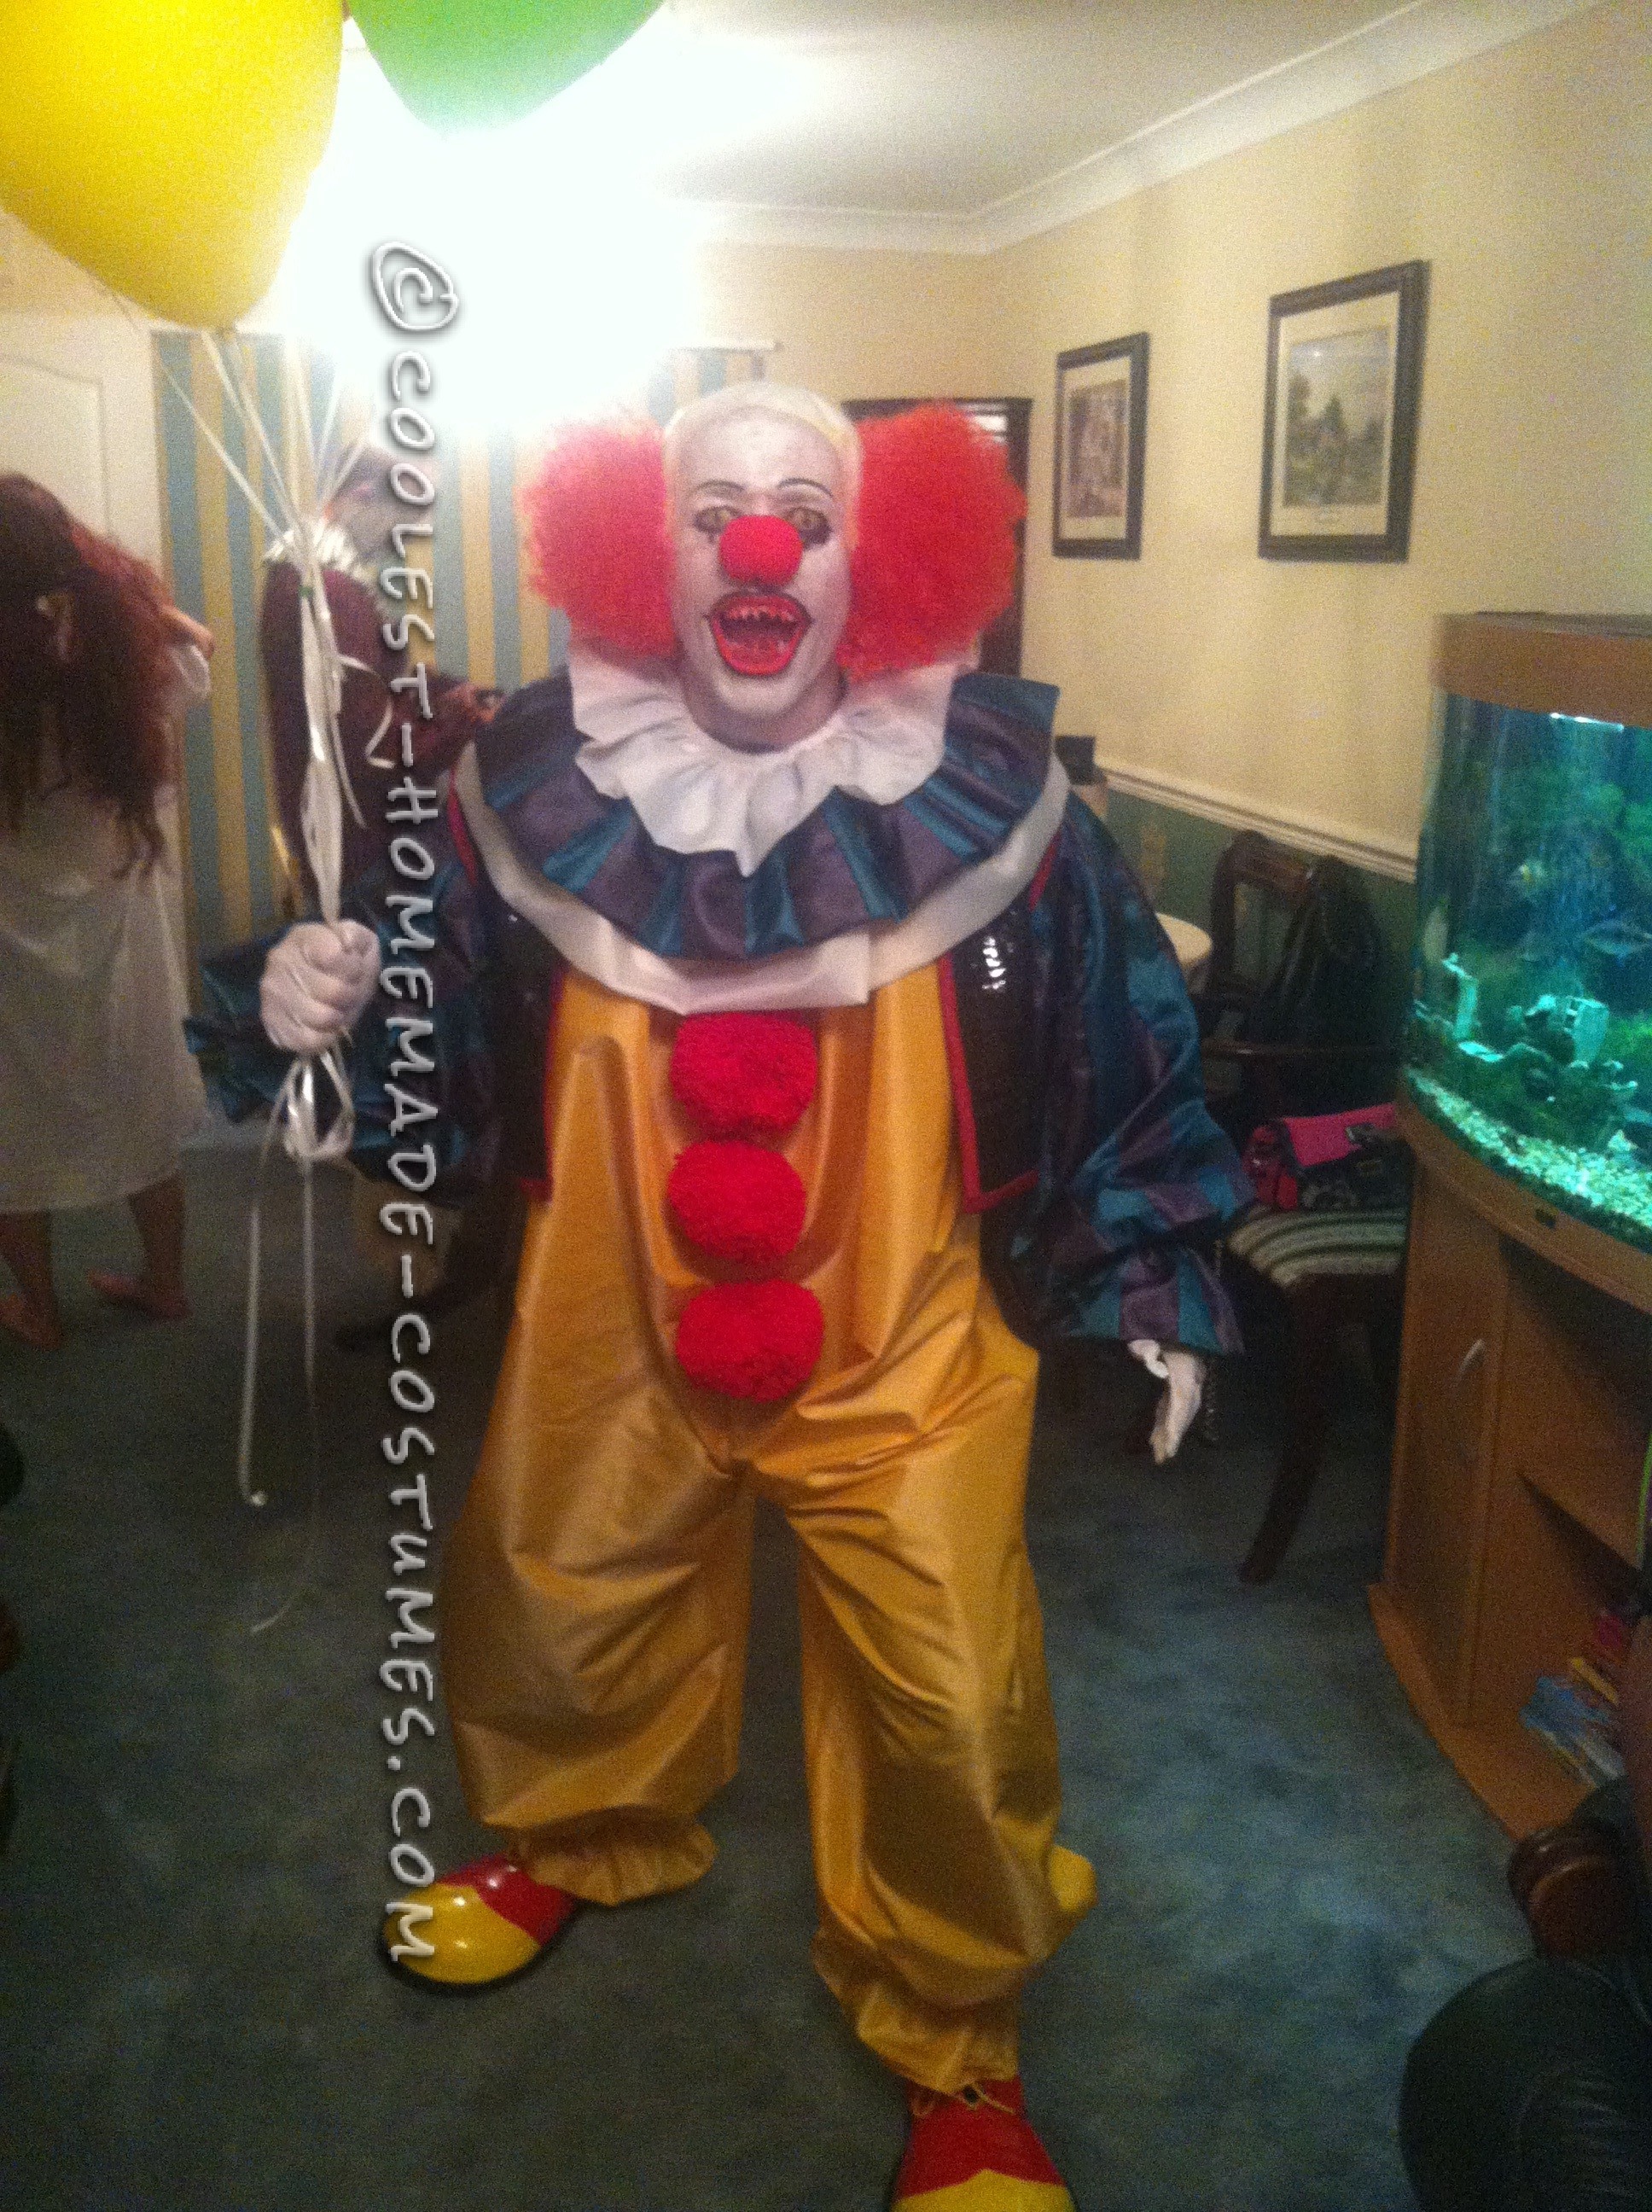 Coolest Homemade Pennywise the Clown Costume